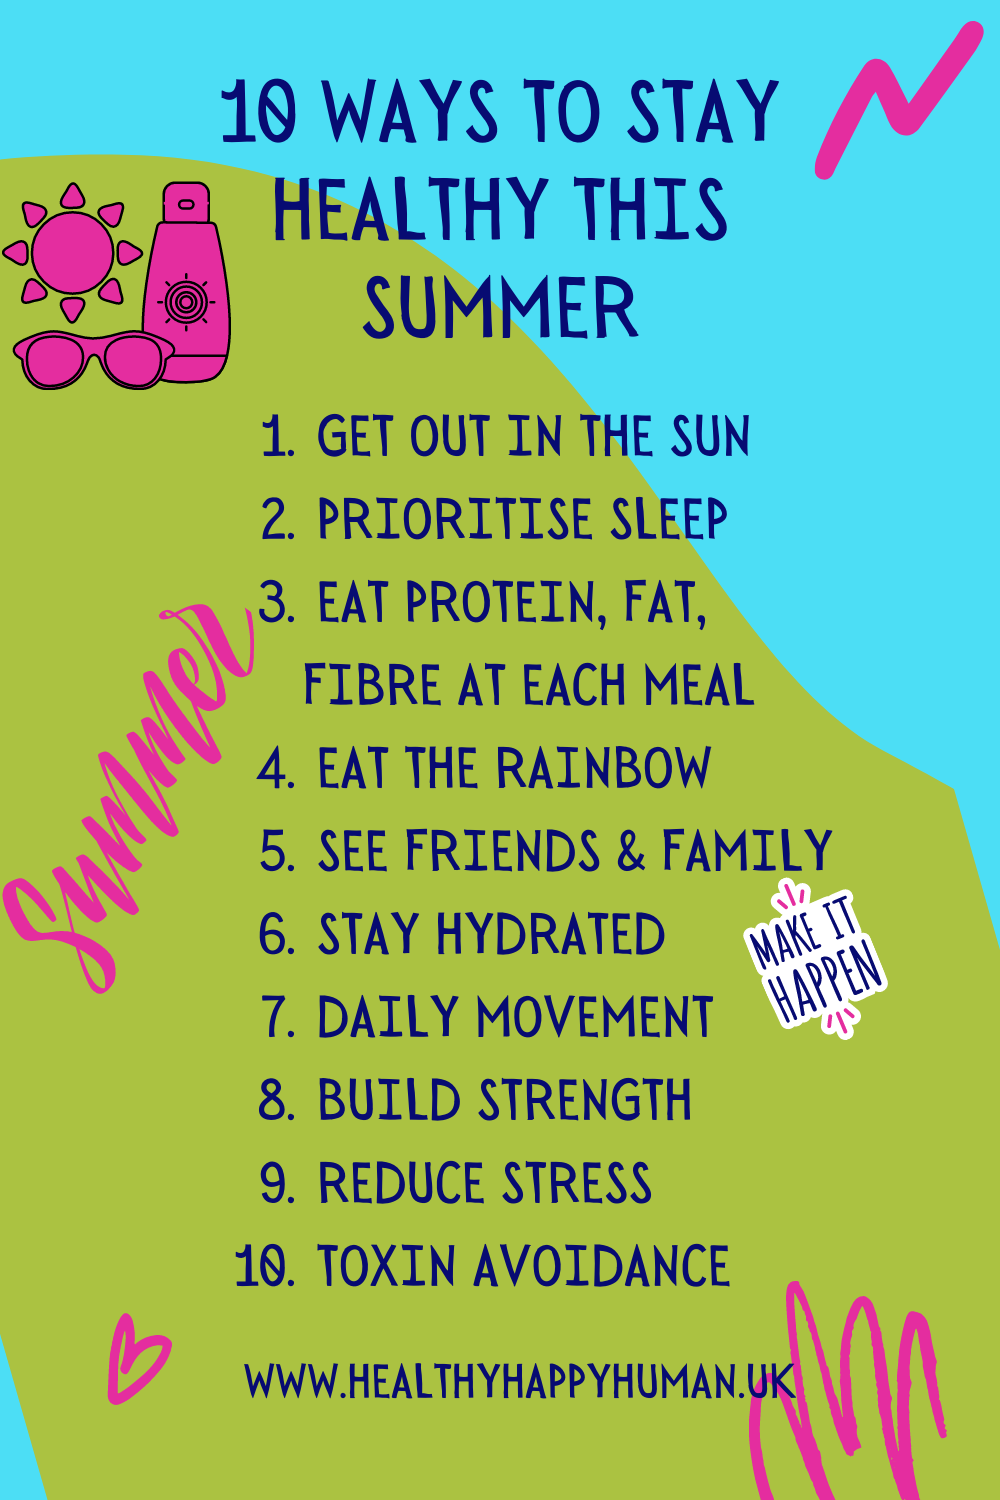 10 Ways To Stay Healthy This Summer — Healthy Happy Human Limited